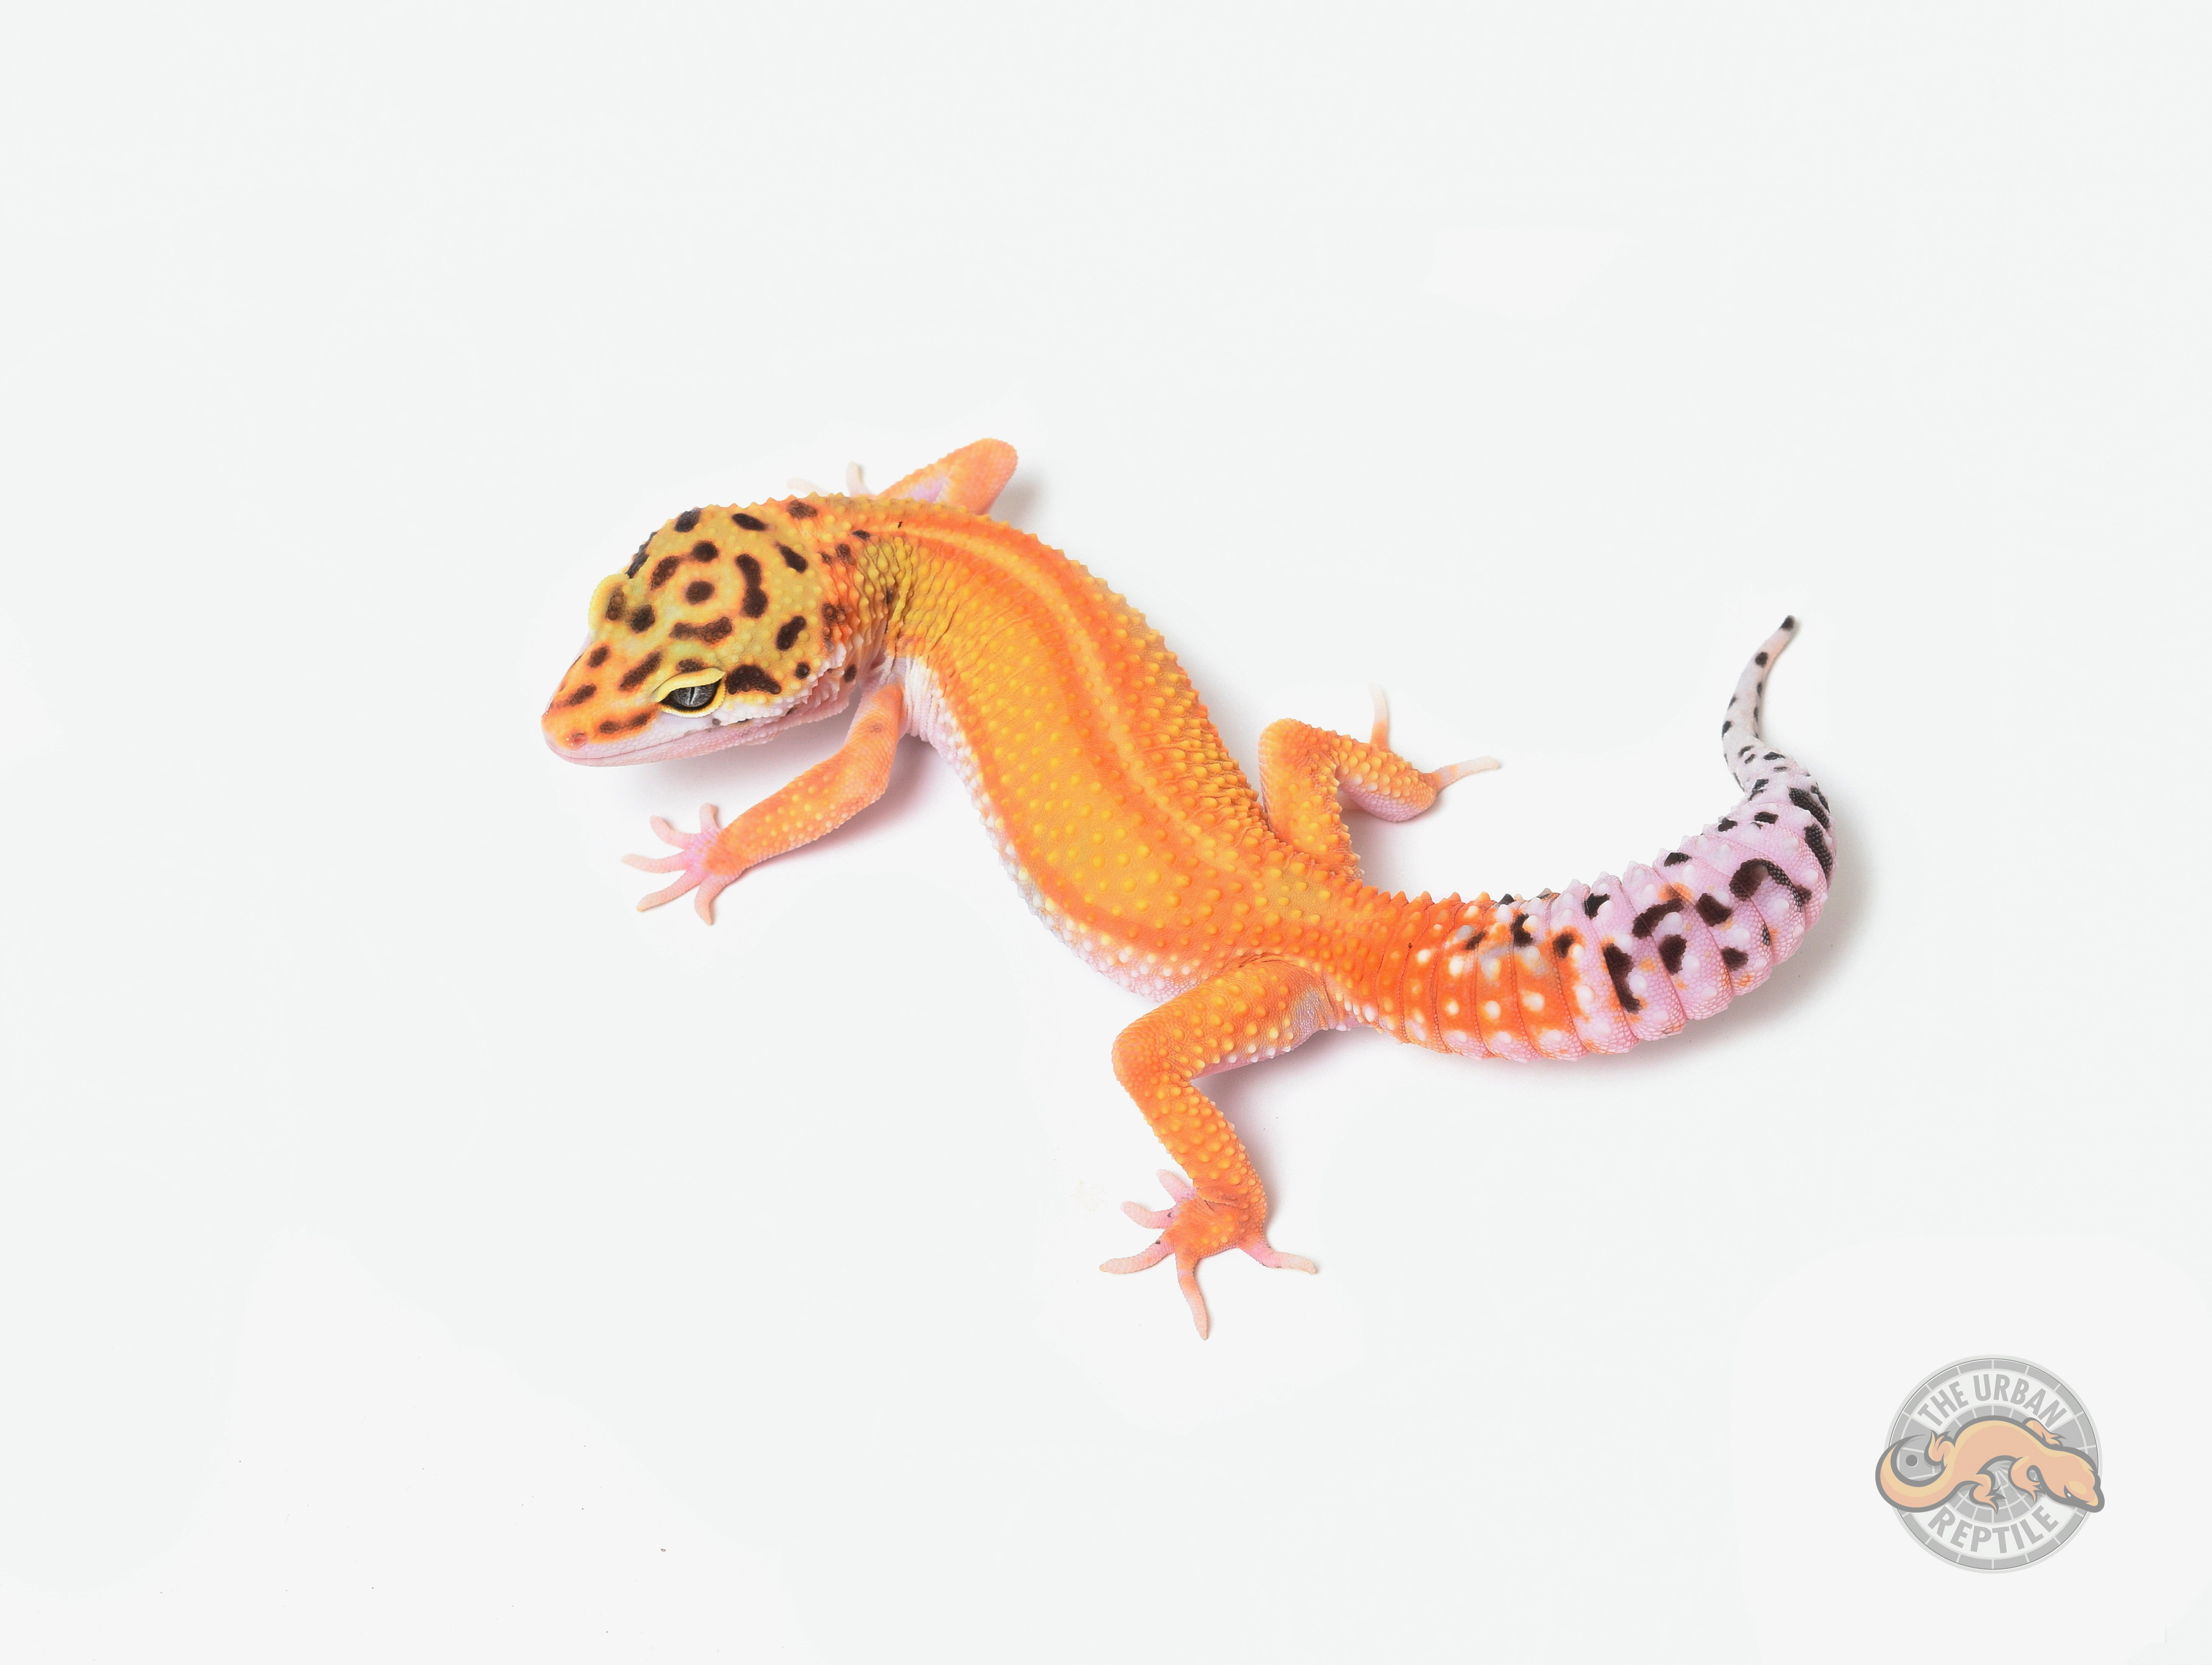 Red Stripe Leopard Gecko by The Urban Reptile